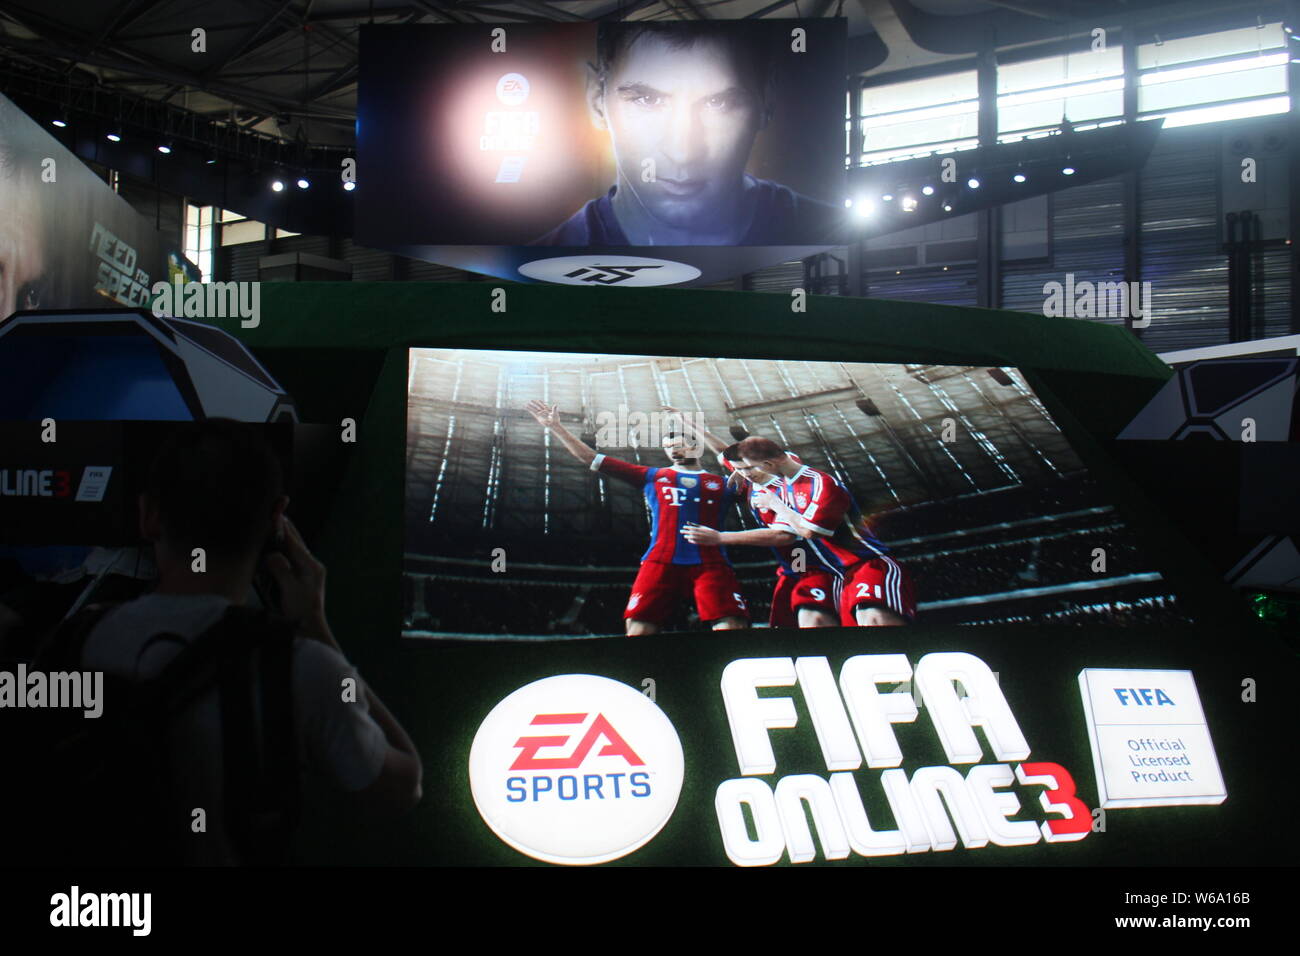 Gamescom 2013] EA's upcoming FIFA 2014 will be free-to-play for mobile  gamers - Droid Gamers